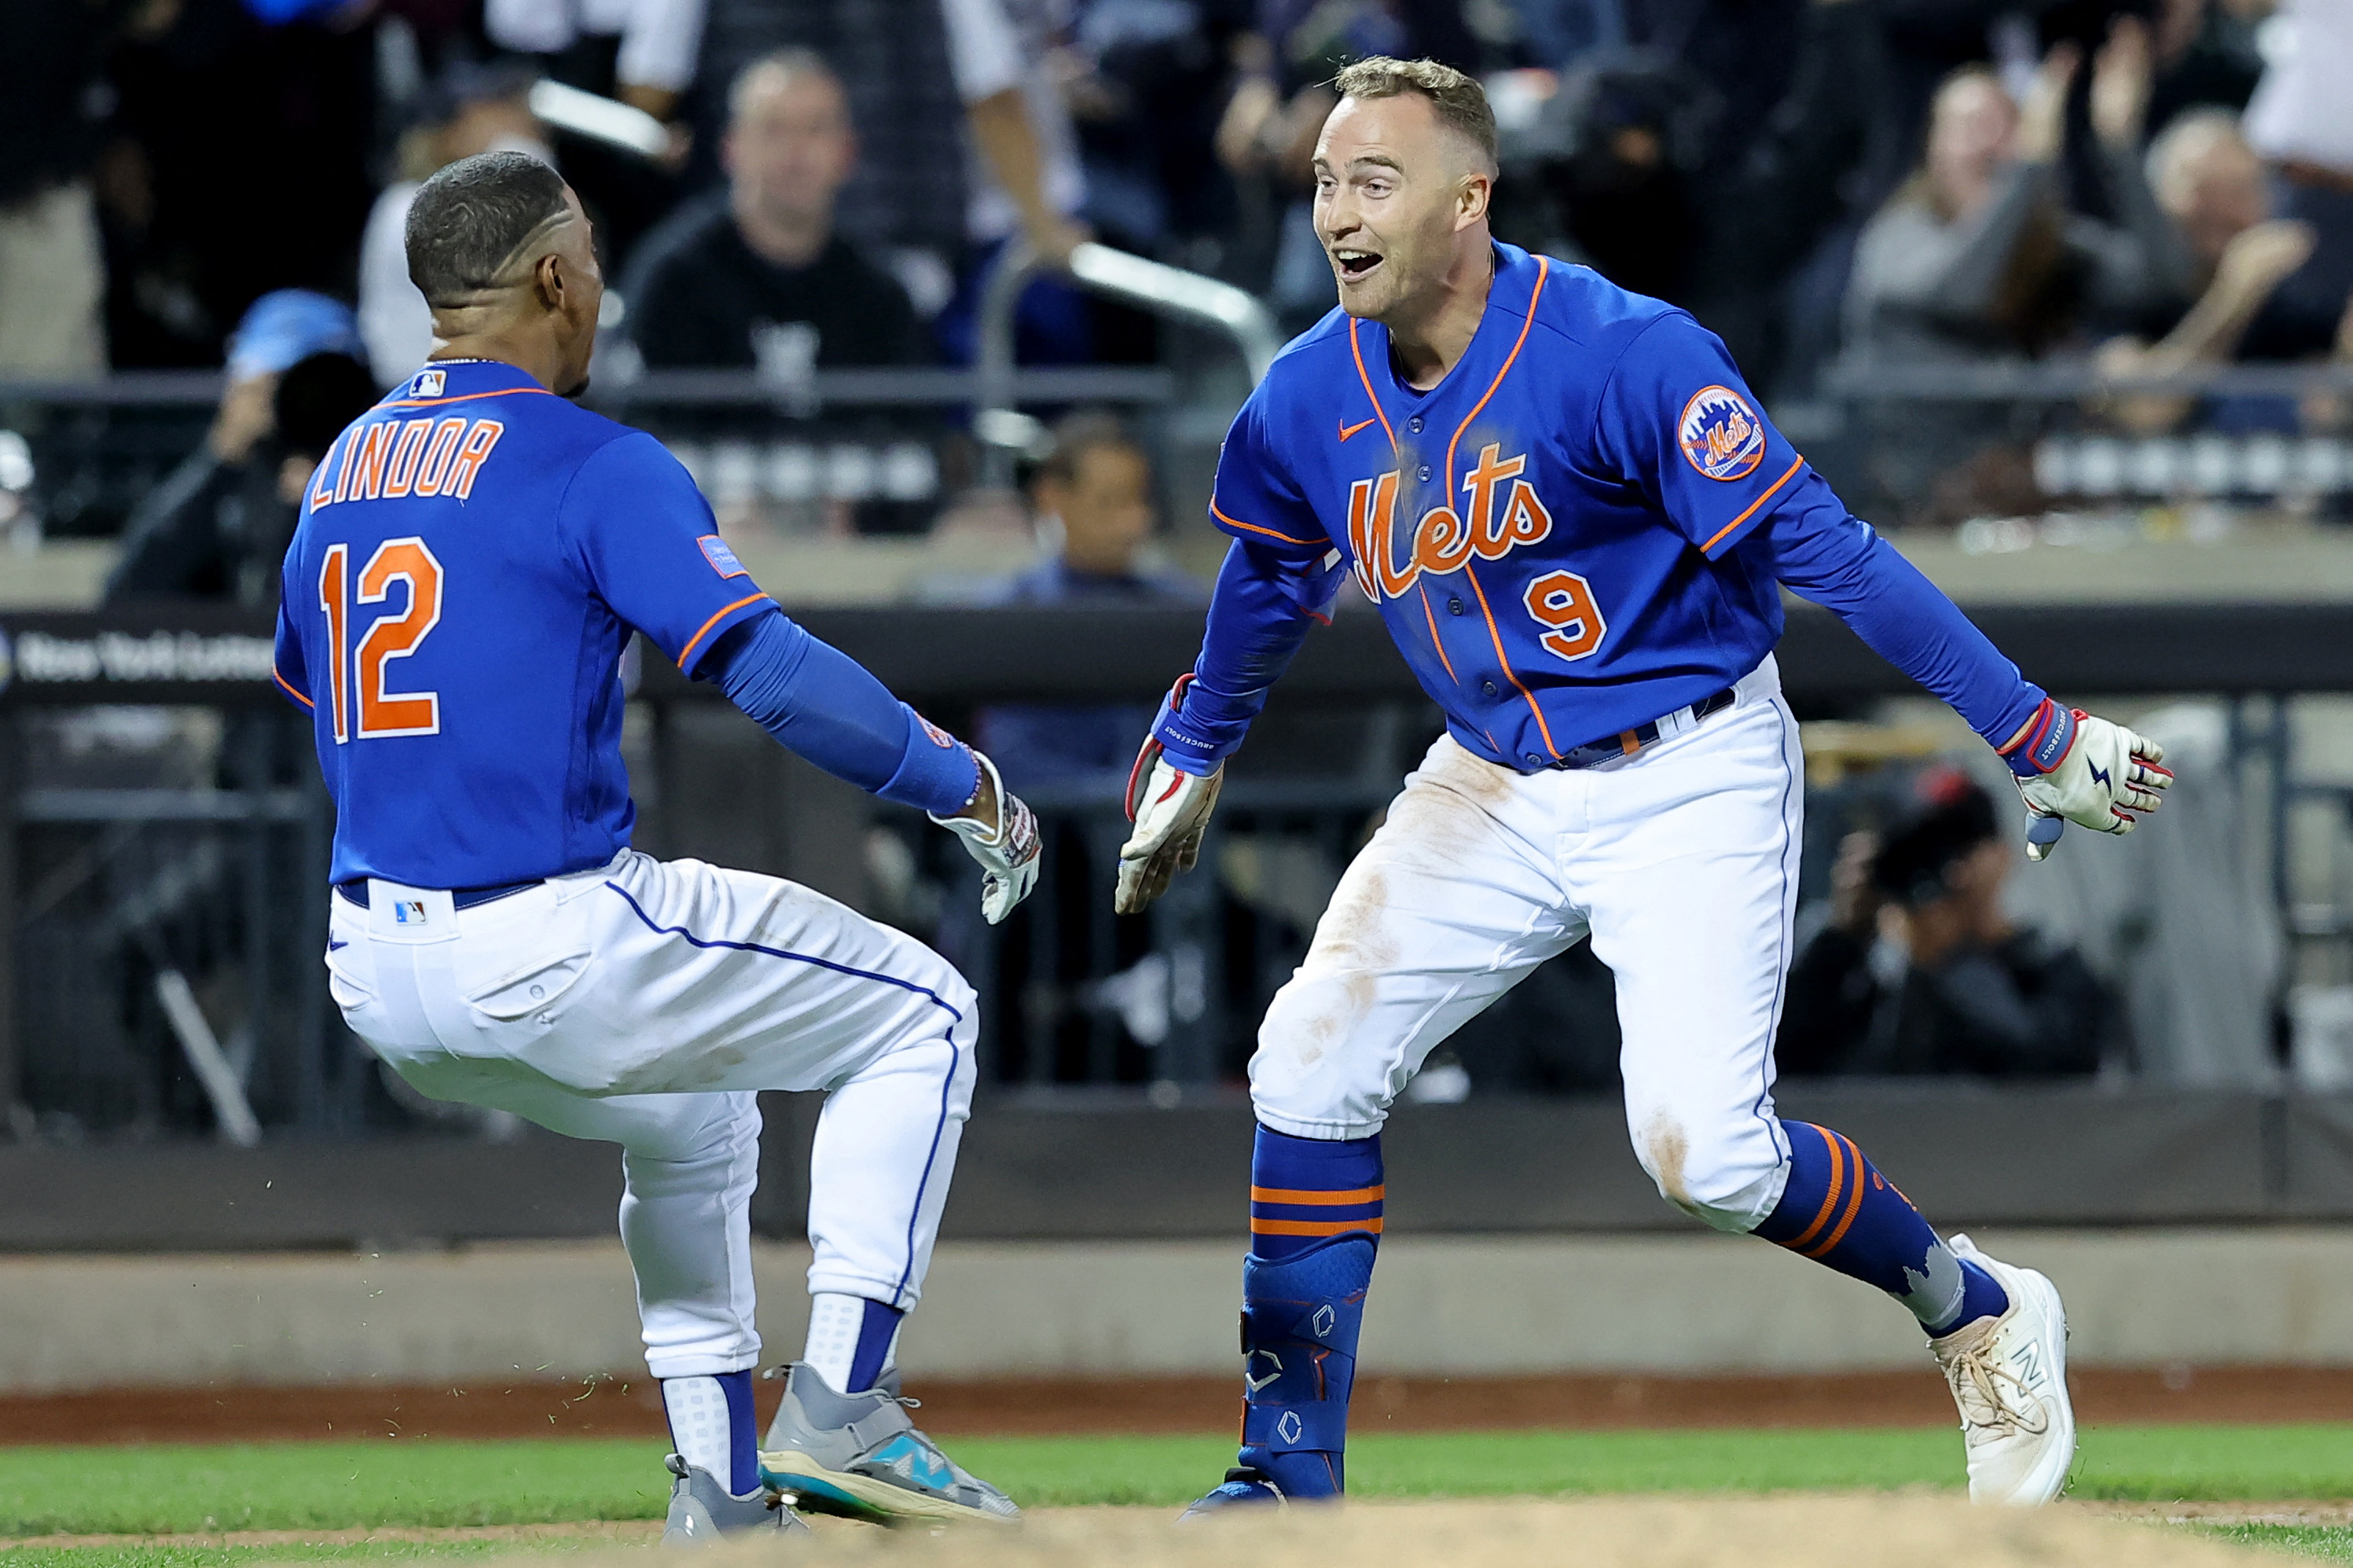 Brandon Nimmo ends up the hero in Mets' victory over Yankees